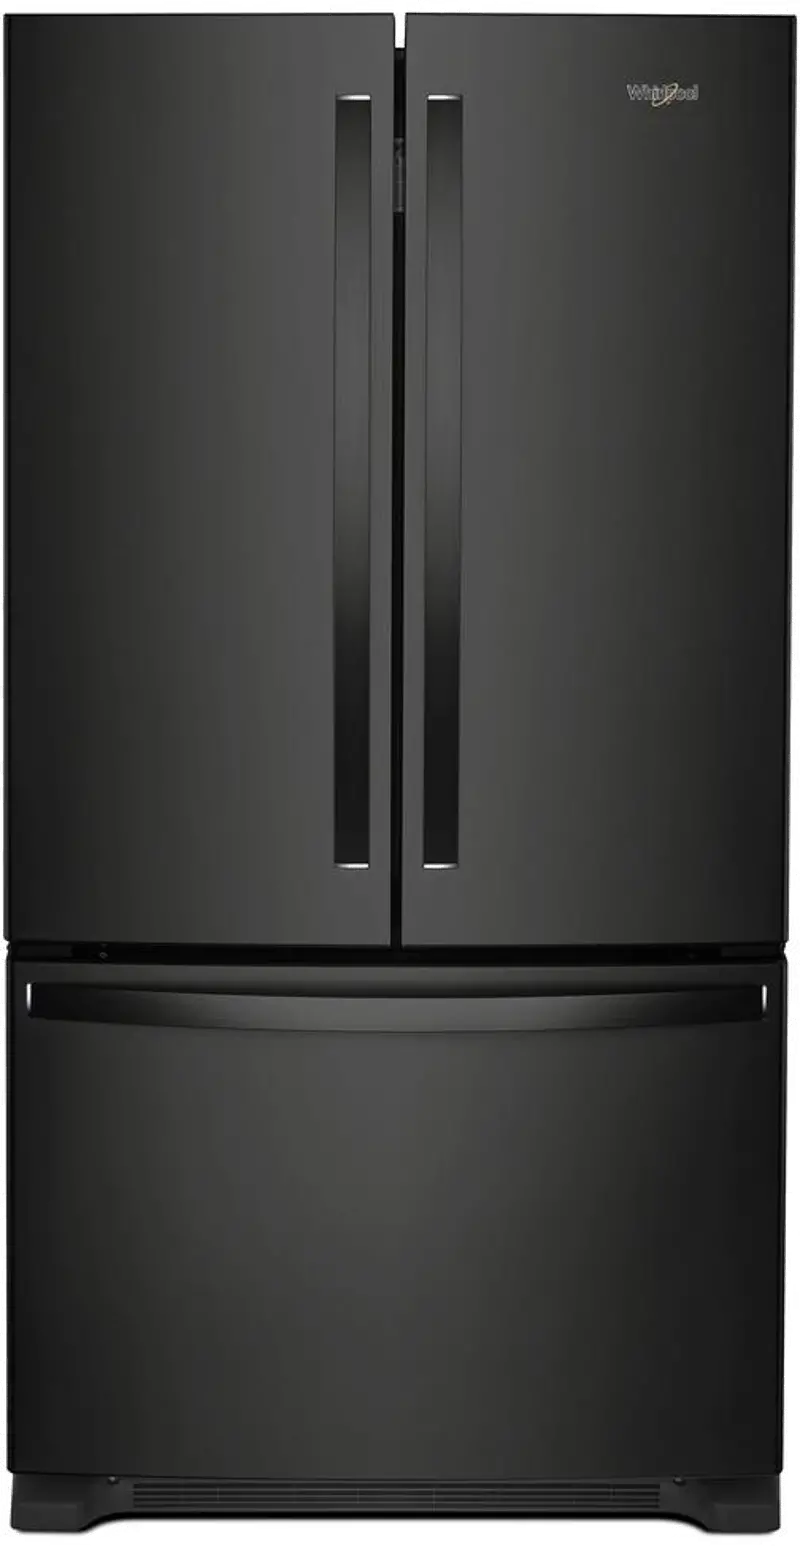 Whirlpool French Door Refrigerator WRF535SWHB | RC Willey